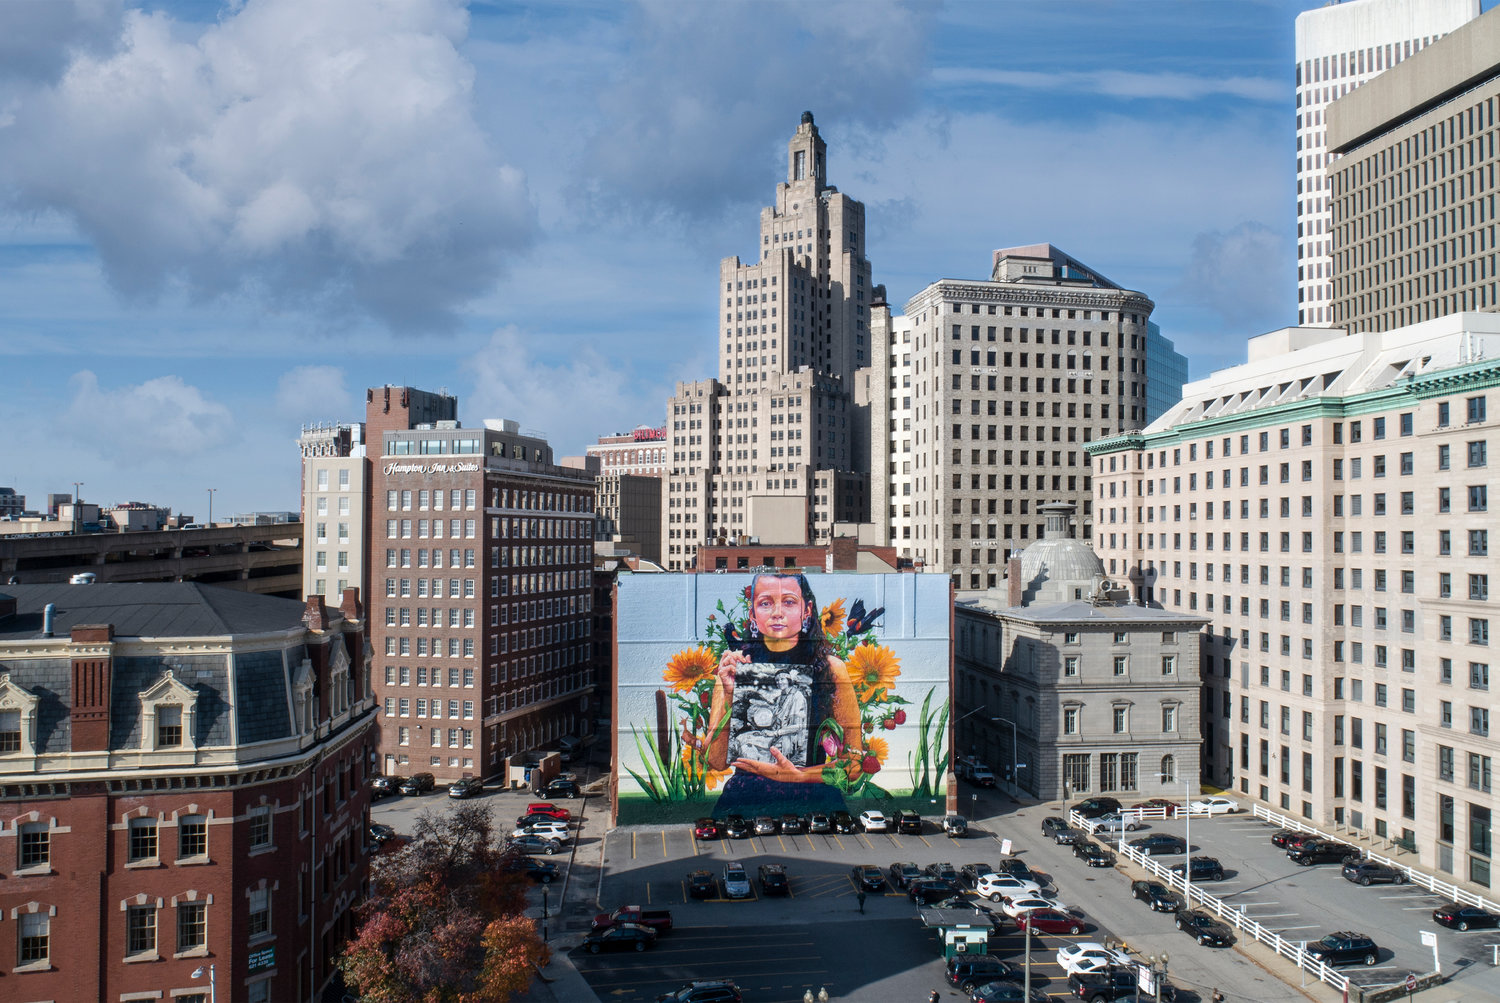 The “Still Here” mural by Gaia stands out against the city skyline